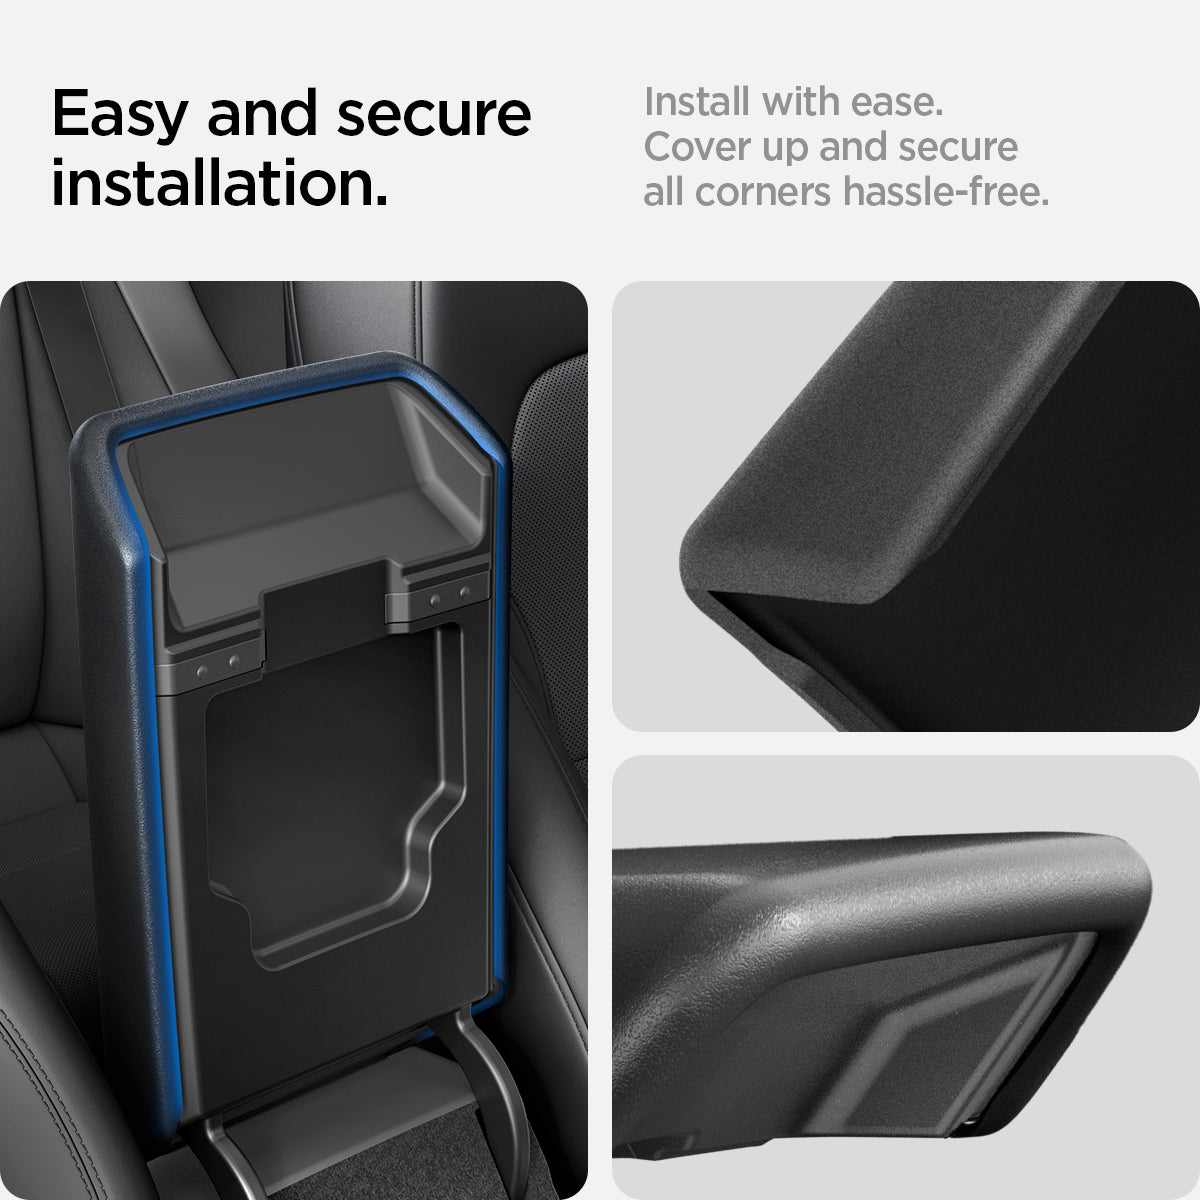 ACP07410 - Model 3 (2024) Armrest Cover TO240H in Black showing the easy and secure installation, install with ease, cover up and secure all corners hassle-free